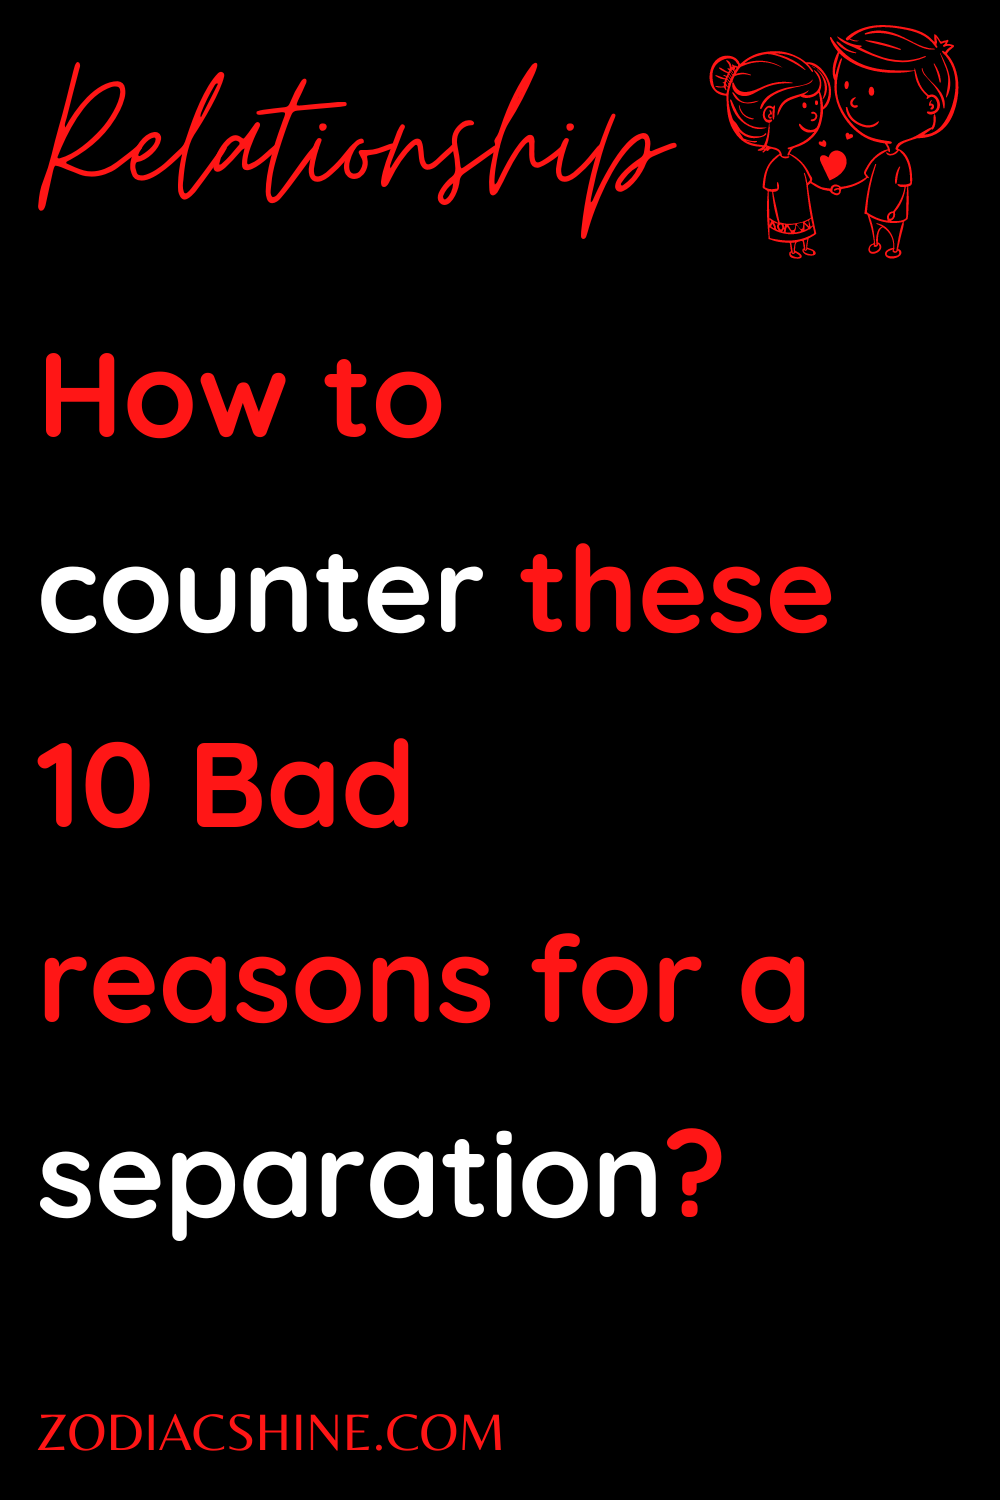 How to counter these 10 Bad reasons for a separation?